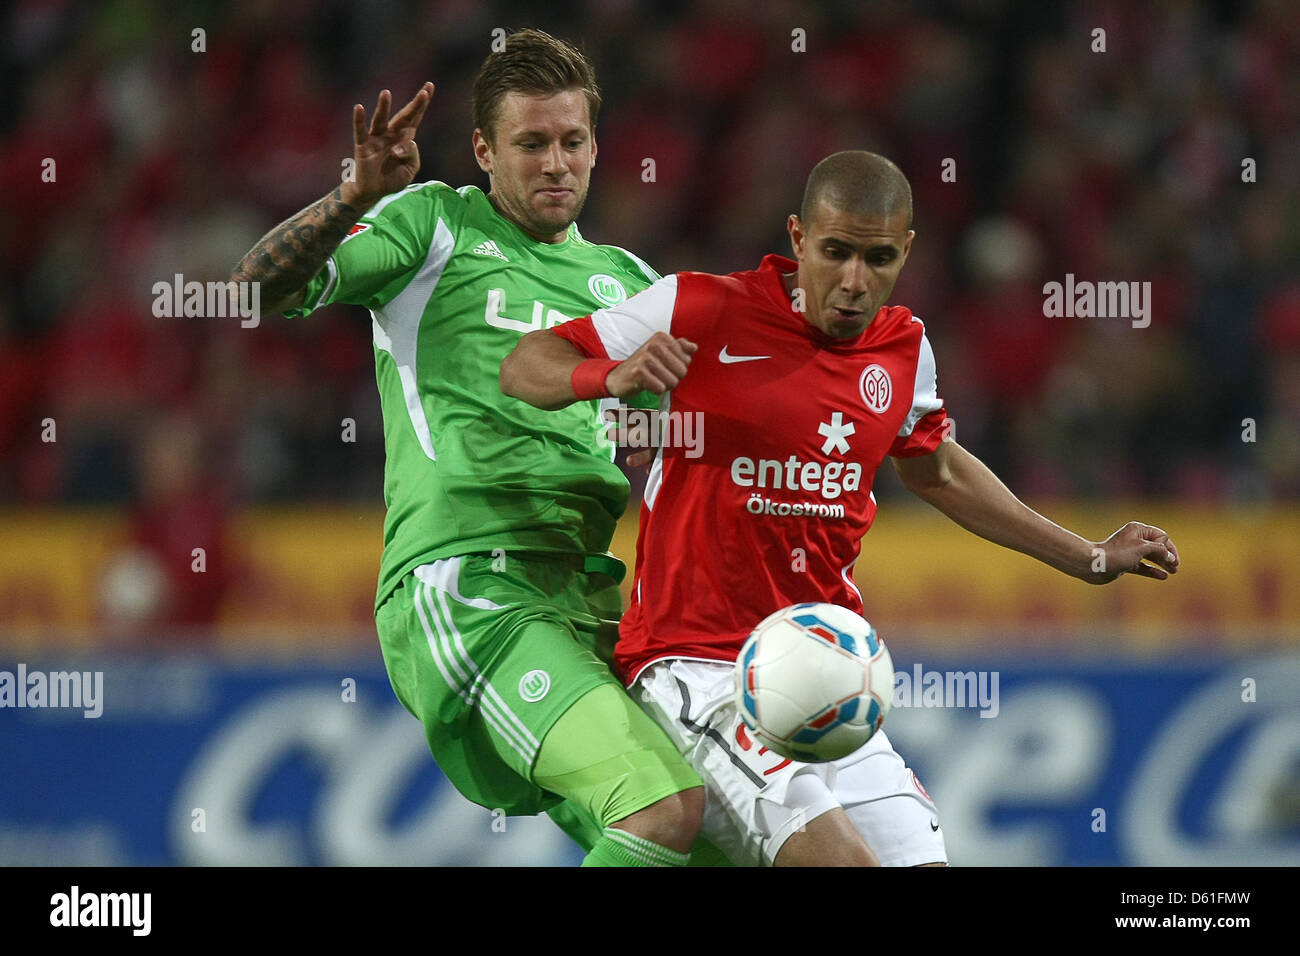 Mainz's Mohamed Zidan and Wolfsburg's Marco Russ (L) vie for the ball during the Bundesliga soccer match between FSV Mainz 05 and VfL Wolfsburg at the Coface Arena in Mainz, Germany, 20 April 2012. Photo: Fredrik Von Erichsen Stock Photo